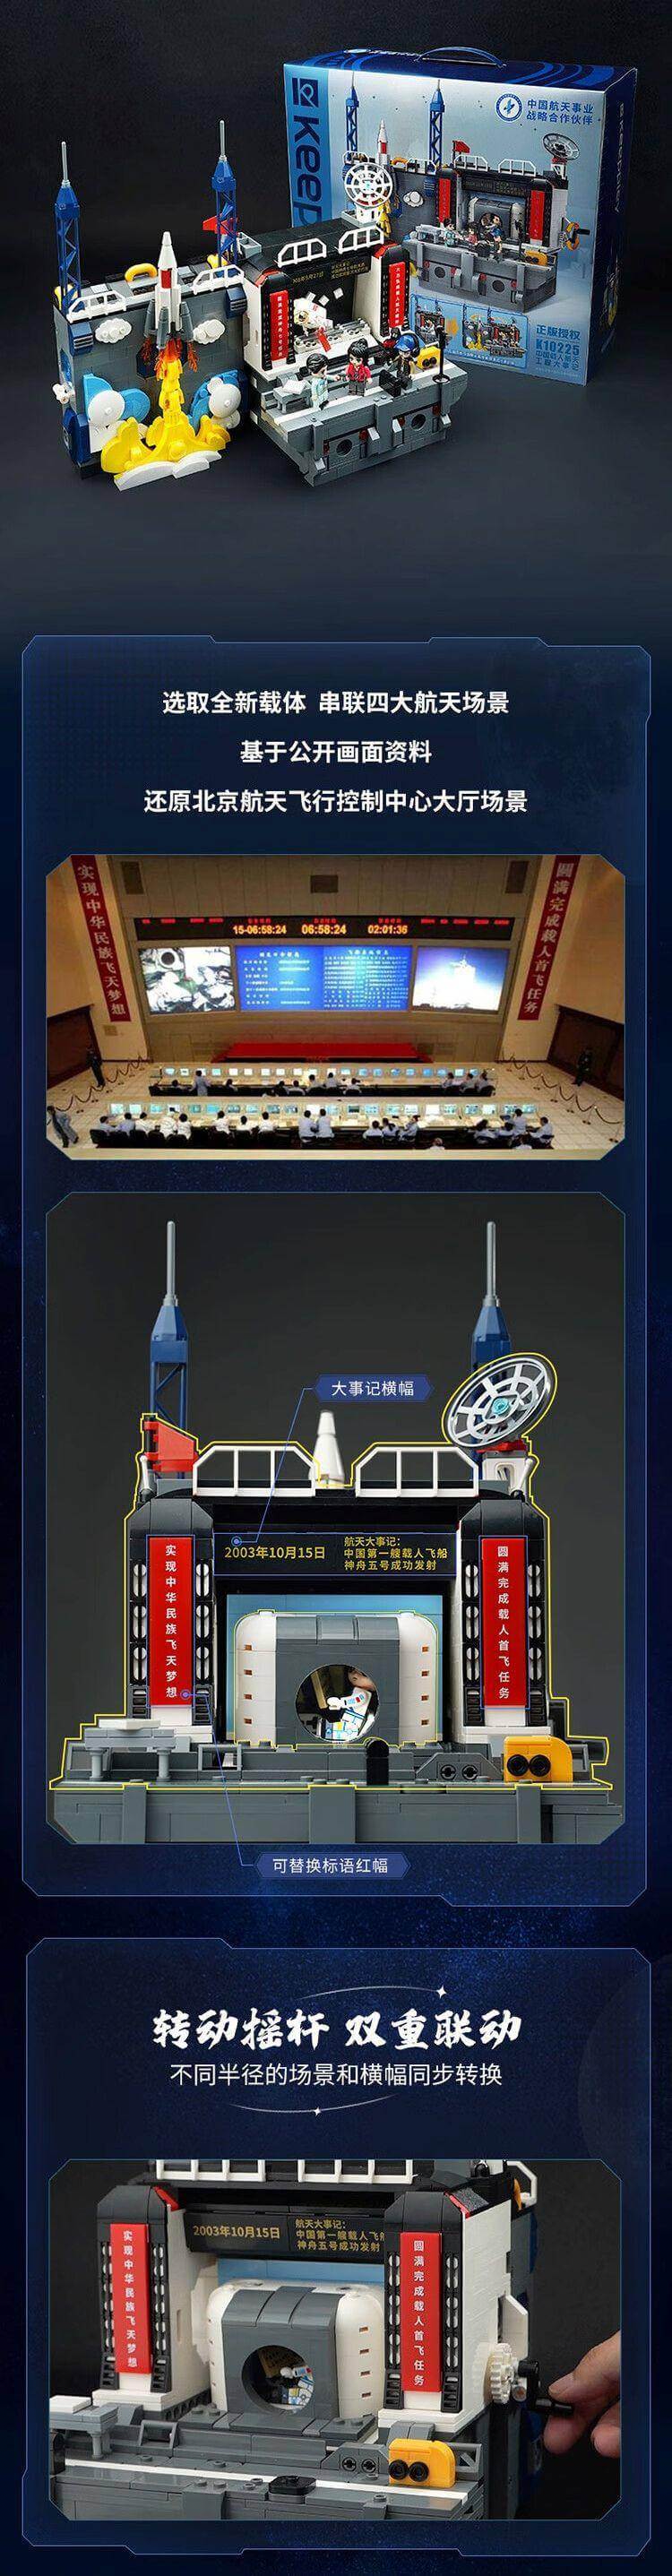 keeppley K10225 Major Events of China's Manned Spaceflight Project